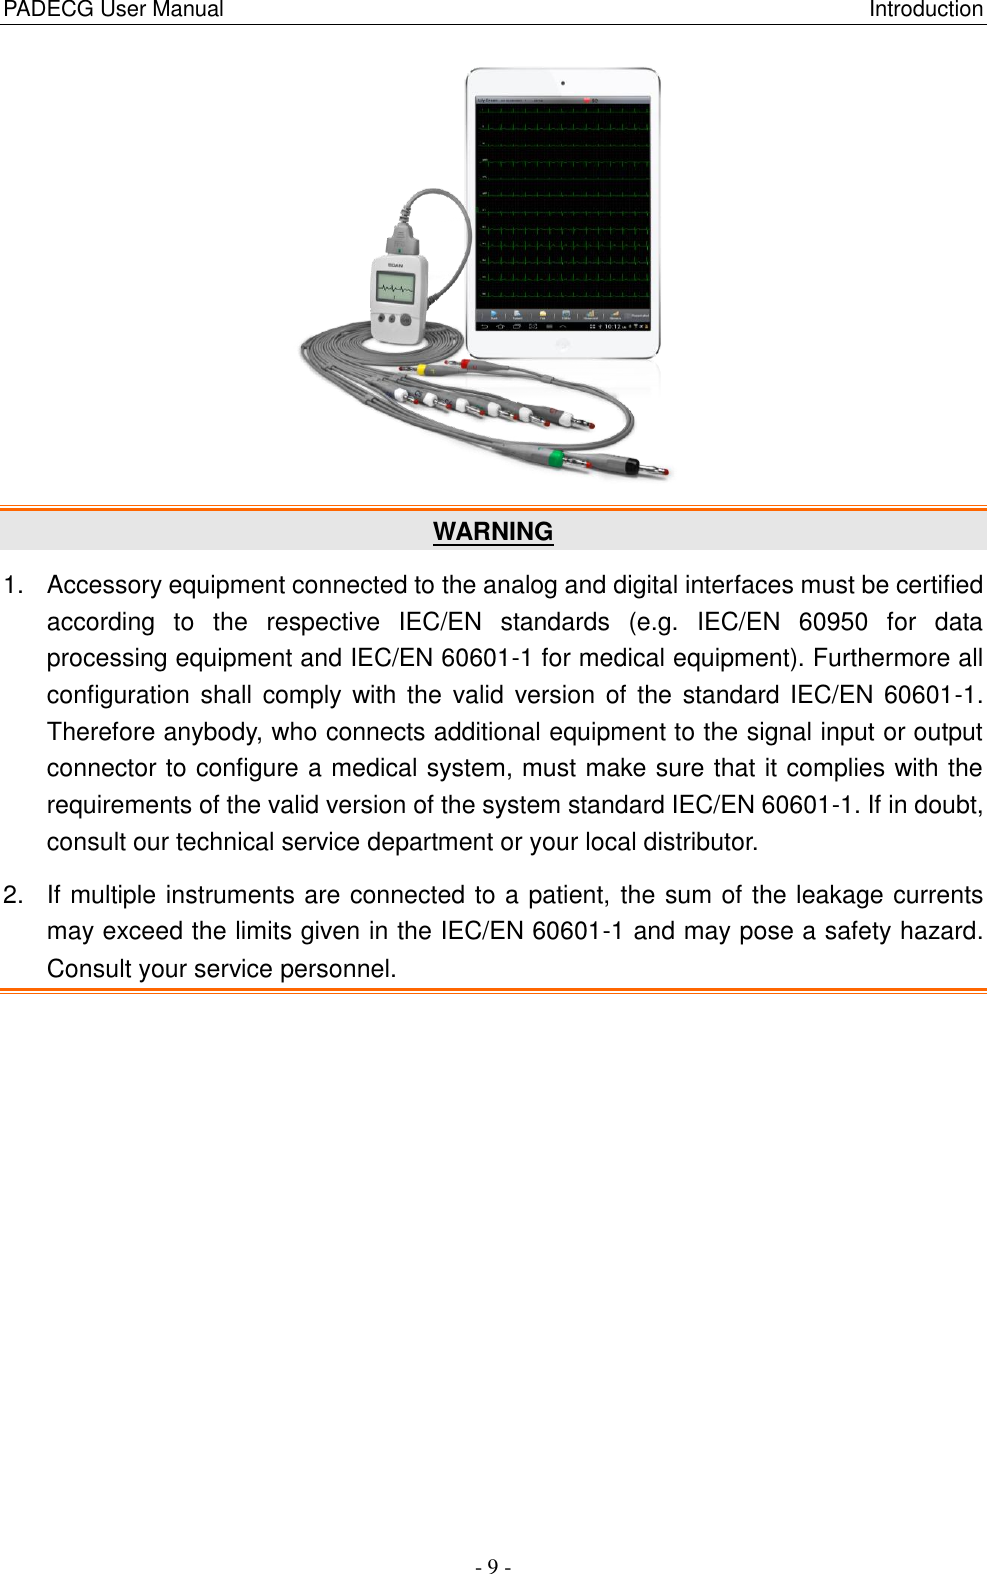 PADECG User Manual                                                                                                                      Introduction - 9 -  WARNING 1.  Accessory equipment connected to the analog and digital interfaces must be certified according  to  the  respective  IEC/EN  standards  (e.g.  IEC/EN  60950  for  data processing equipment and IEC/EN 60601-1 for medical equipment). Furthermore all configuration shall  comply with the  valid version of the  standard IEC/EN 60601-1. Therefore anybody, who connects additional equipment to the signal input or output connector to configure a medical system, must make sure that it complies with the requirements of the valid version of the system standard IEC/EN 60601-1. If in doubt, consult our technical service department or your local distributor. 2.  If multiple instruments are connected to a patient, the sum of the leakage currents may exceed the limits given in the IEC/EN 60601-1 and may pose a safety hazard. Consult your service personnel. 